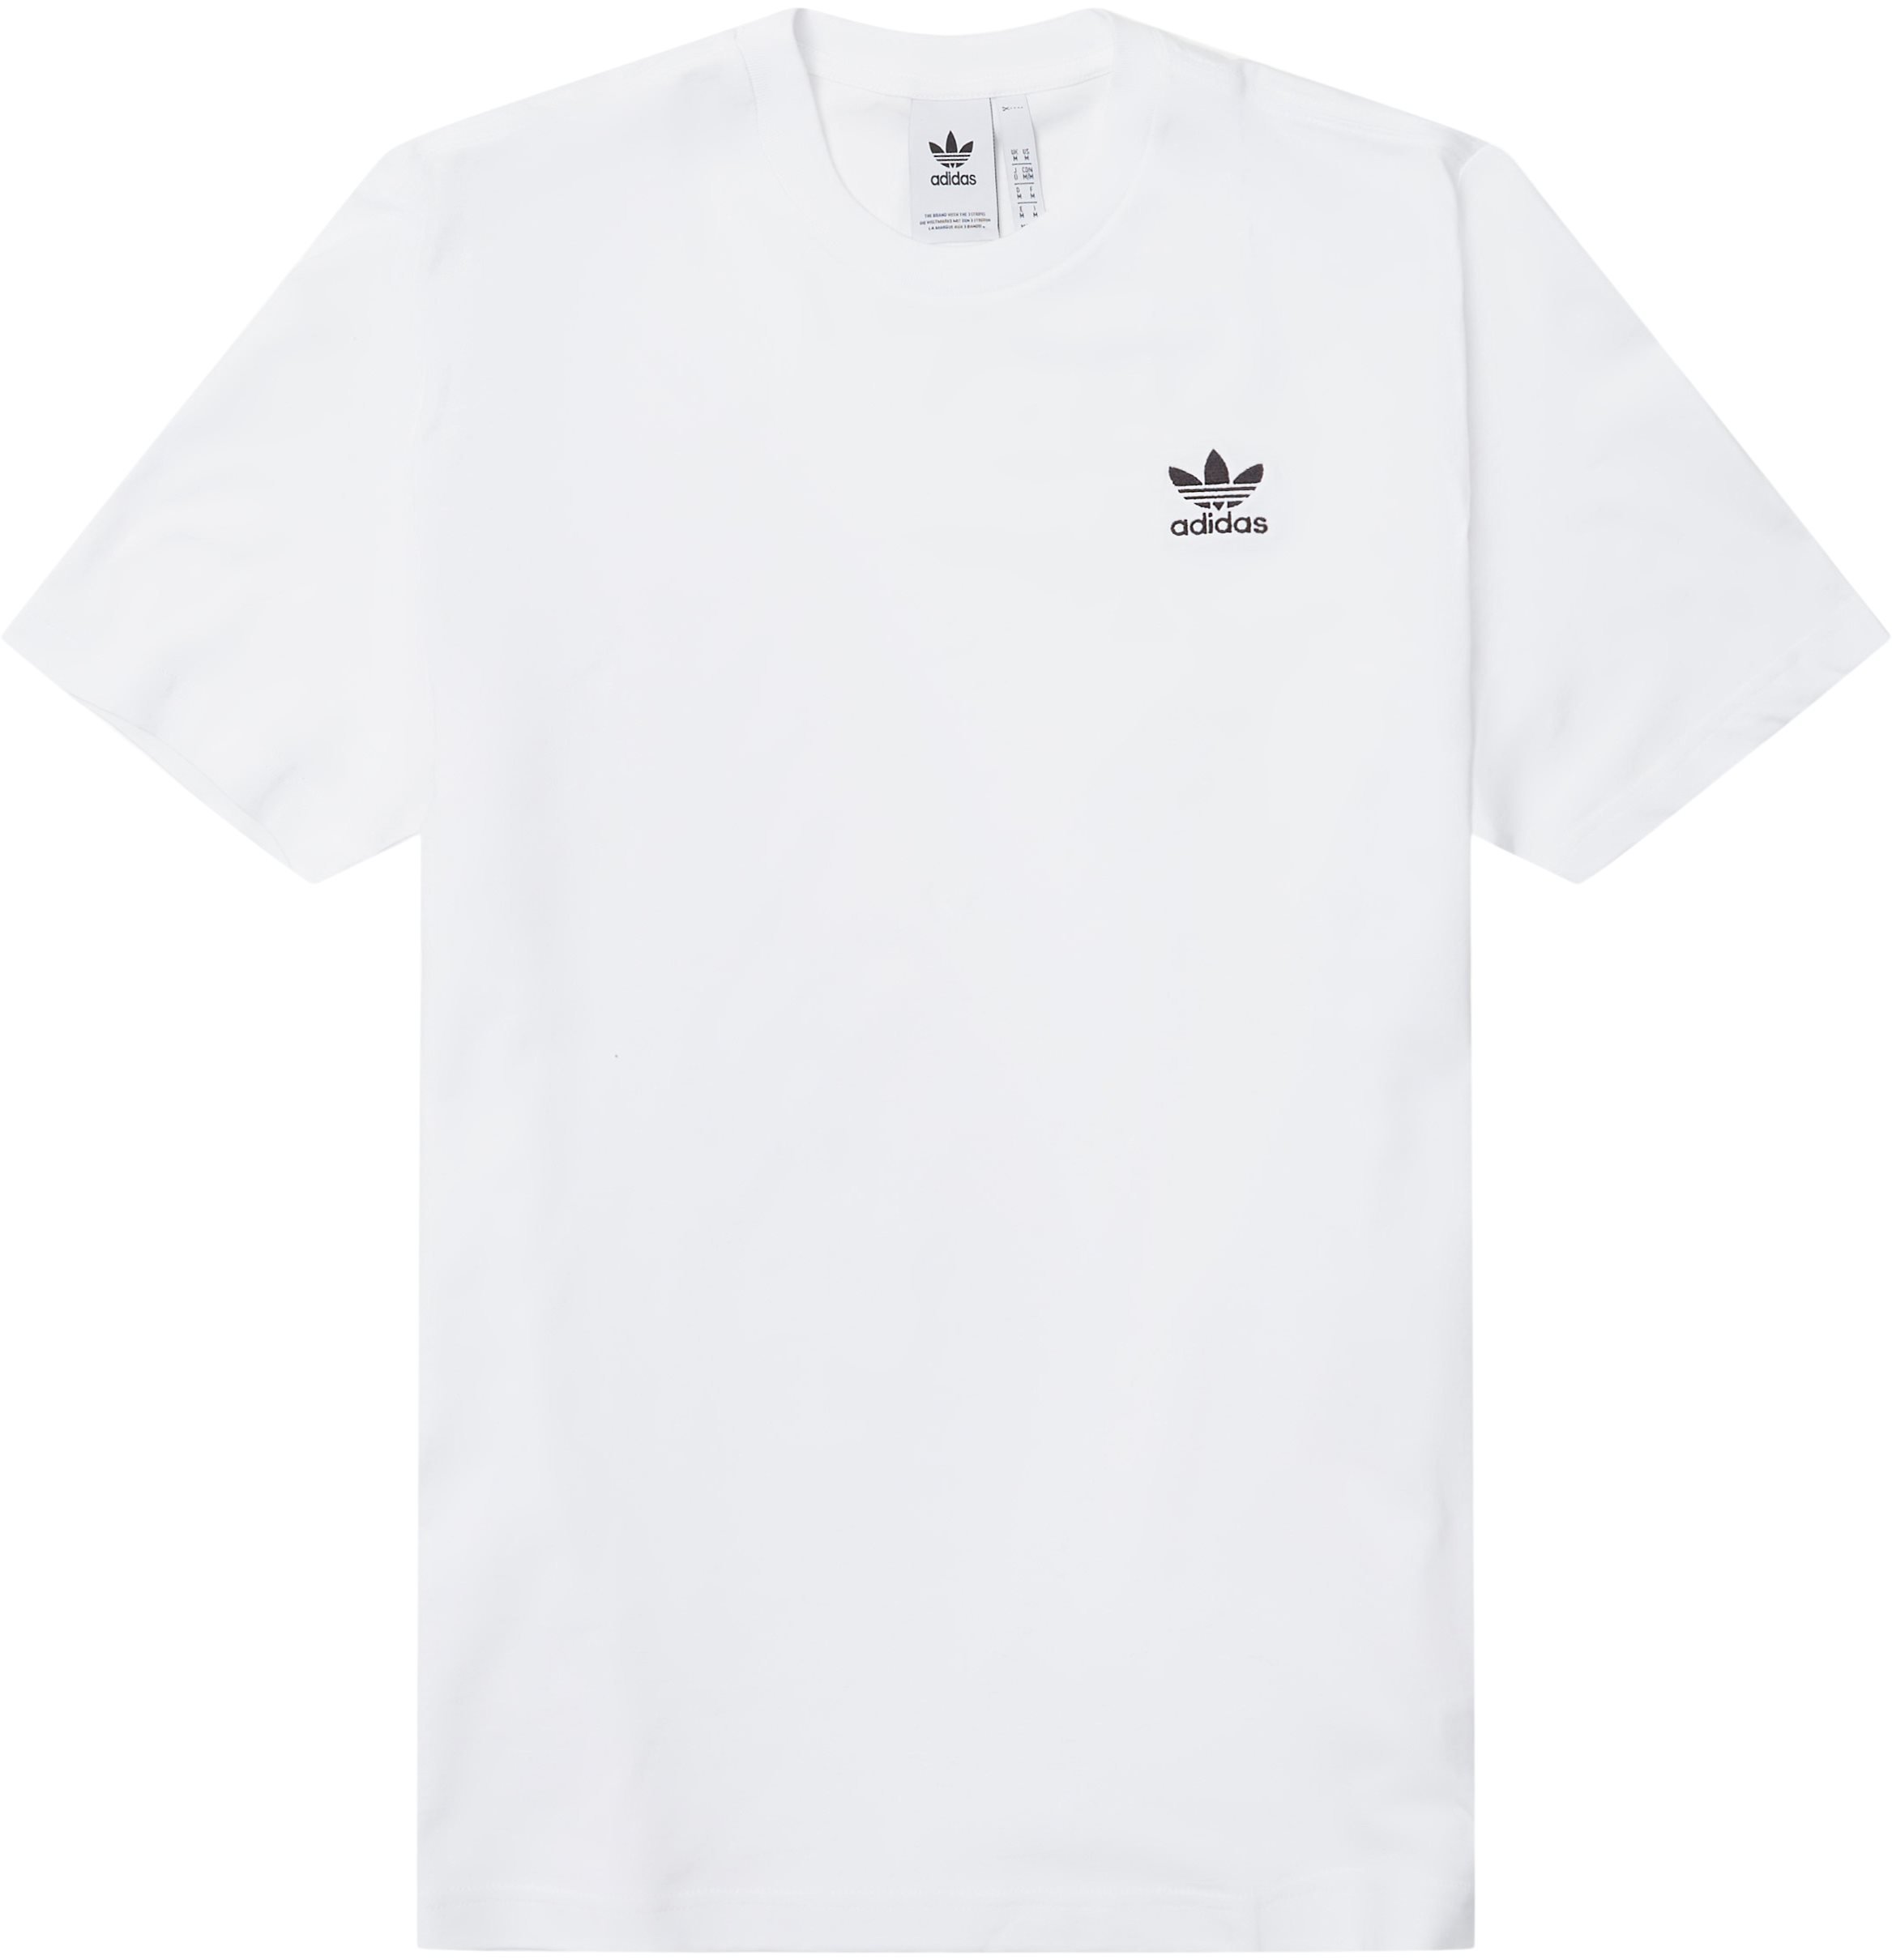 Essential Tee  - T-shirts - Regular fit - White